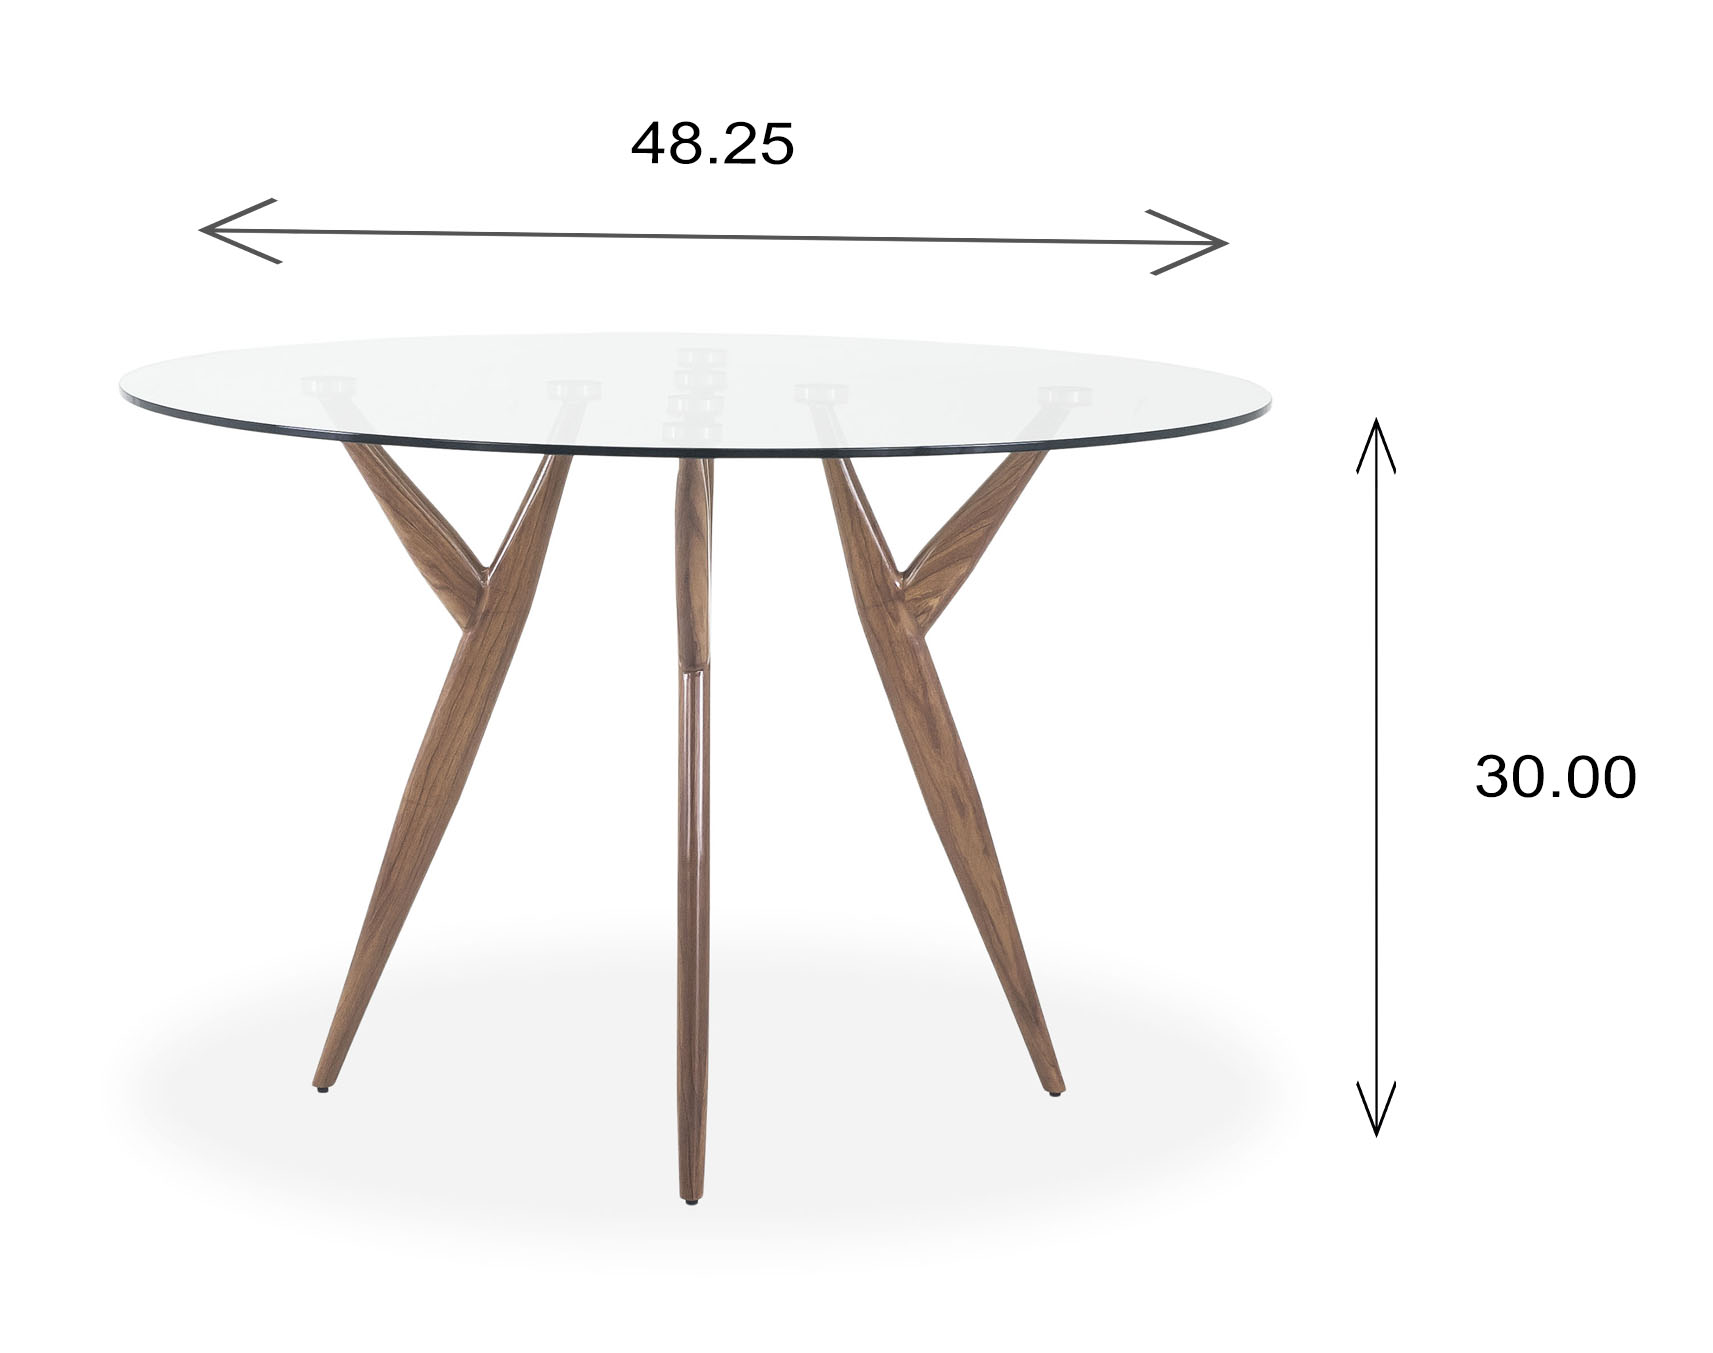 Cyrus Dining Table Dimensions